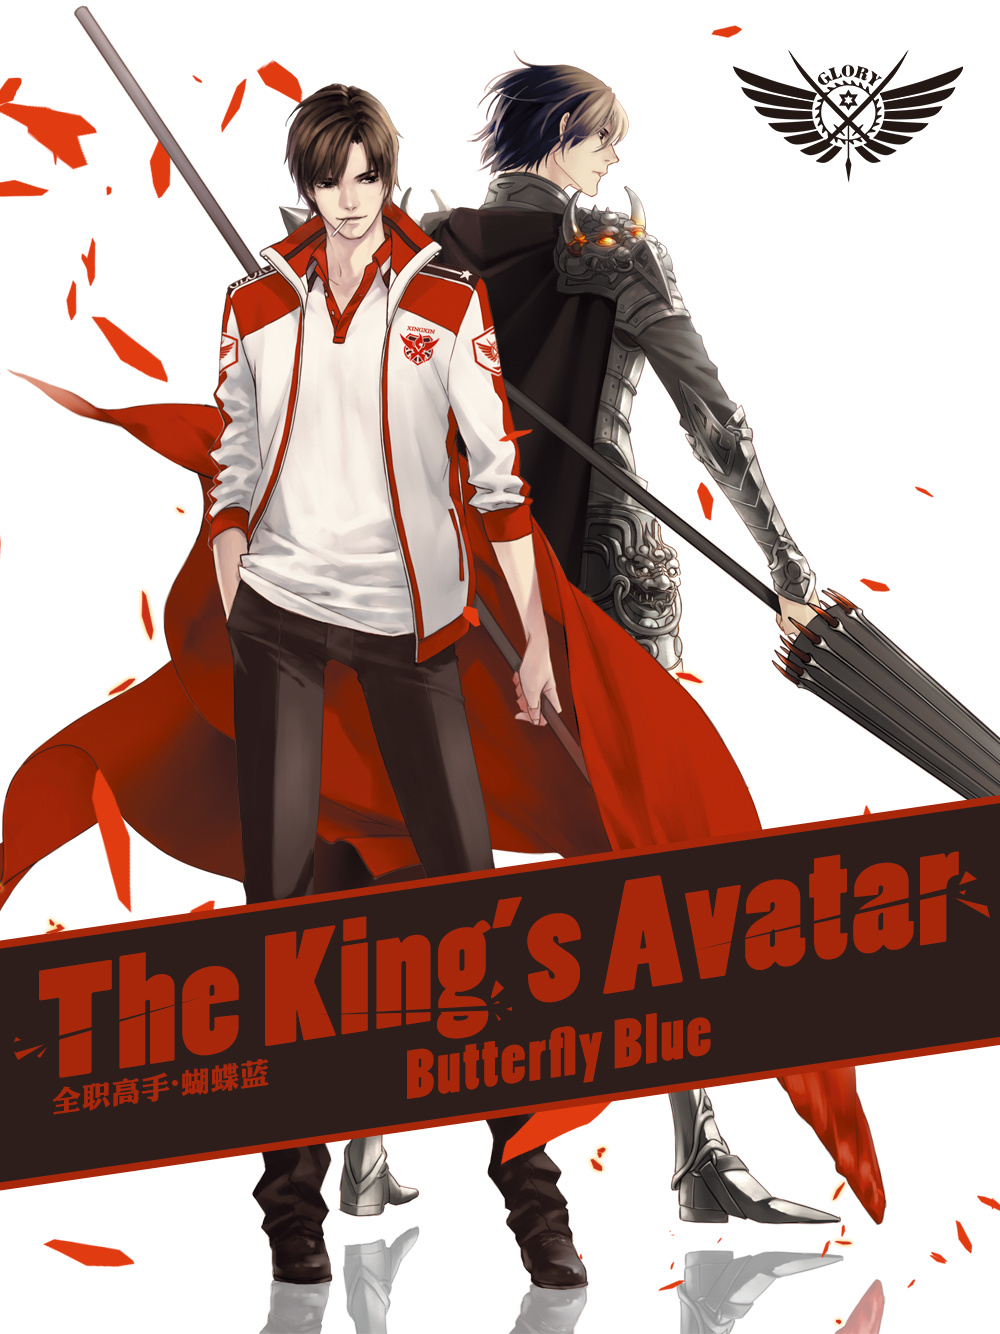 The King's Avatar by Butterfly Blue